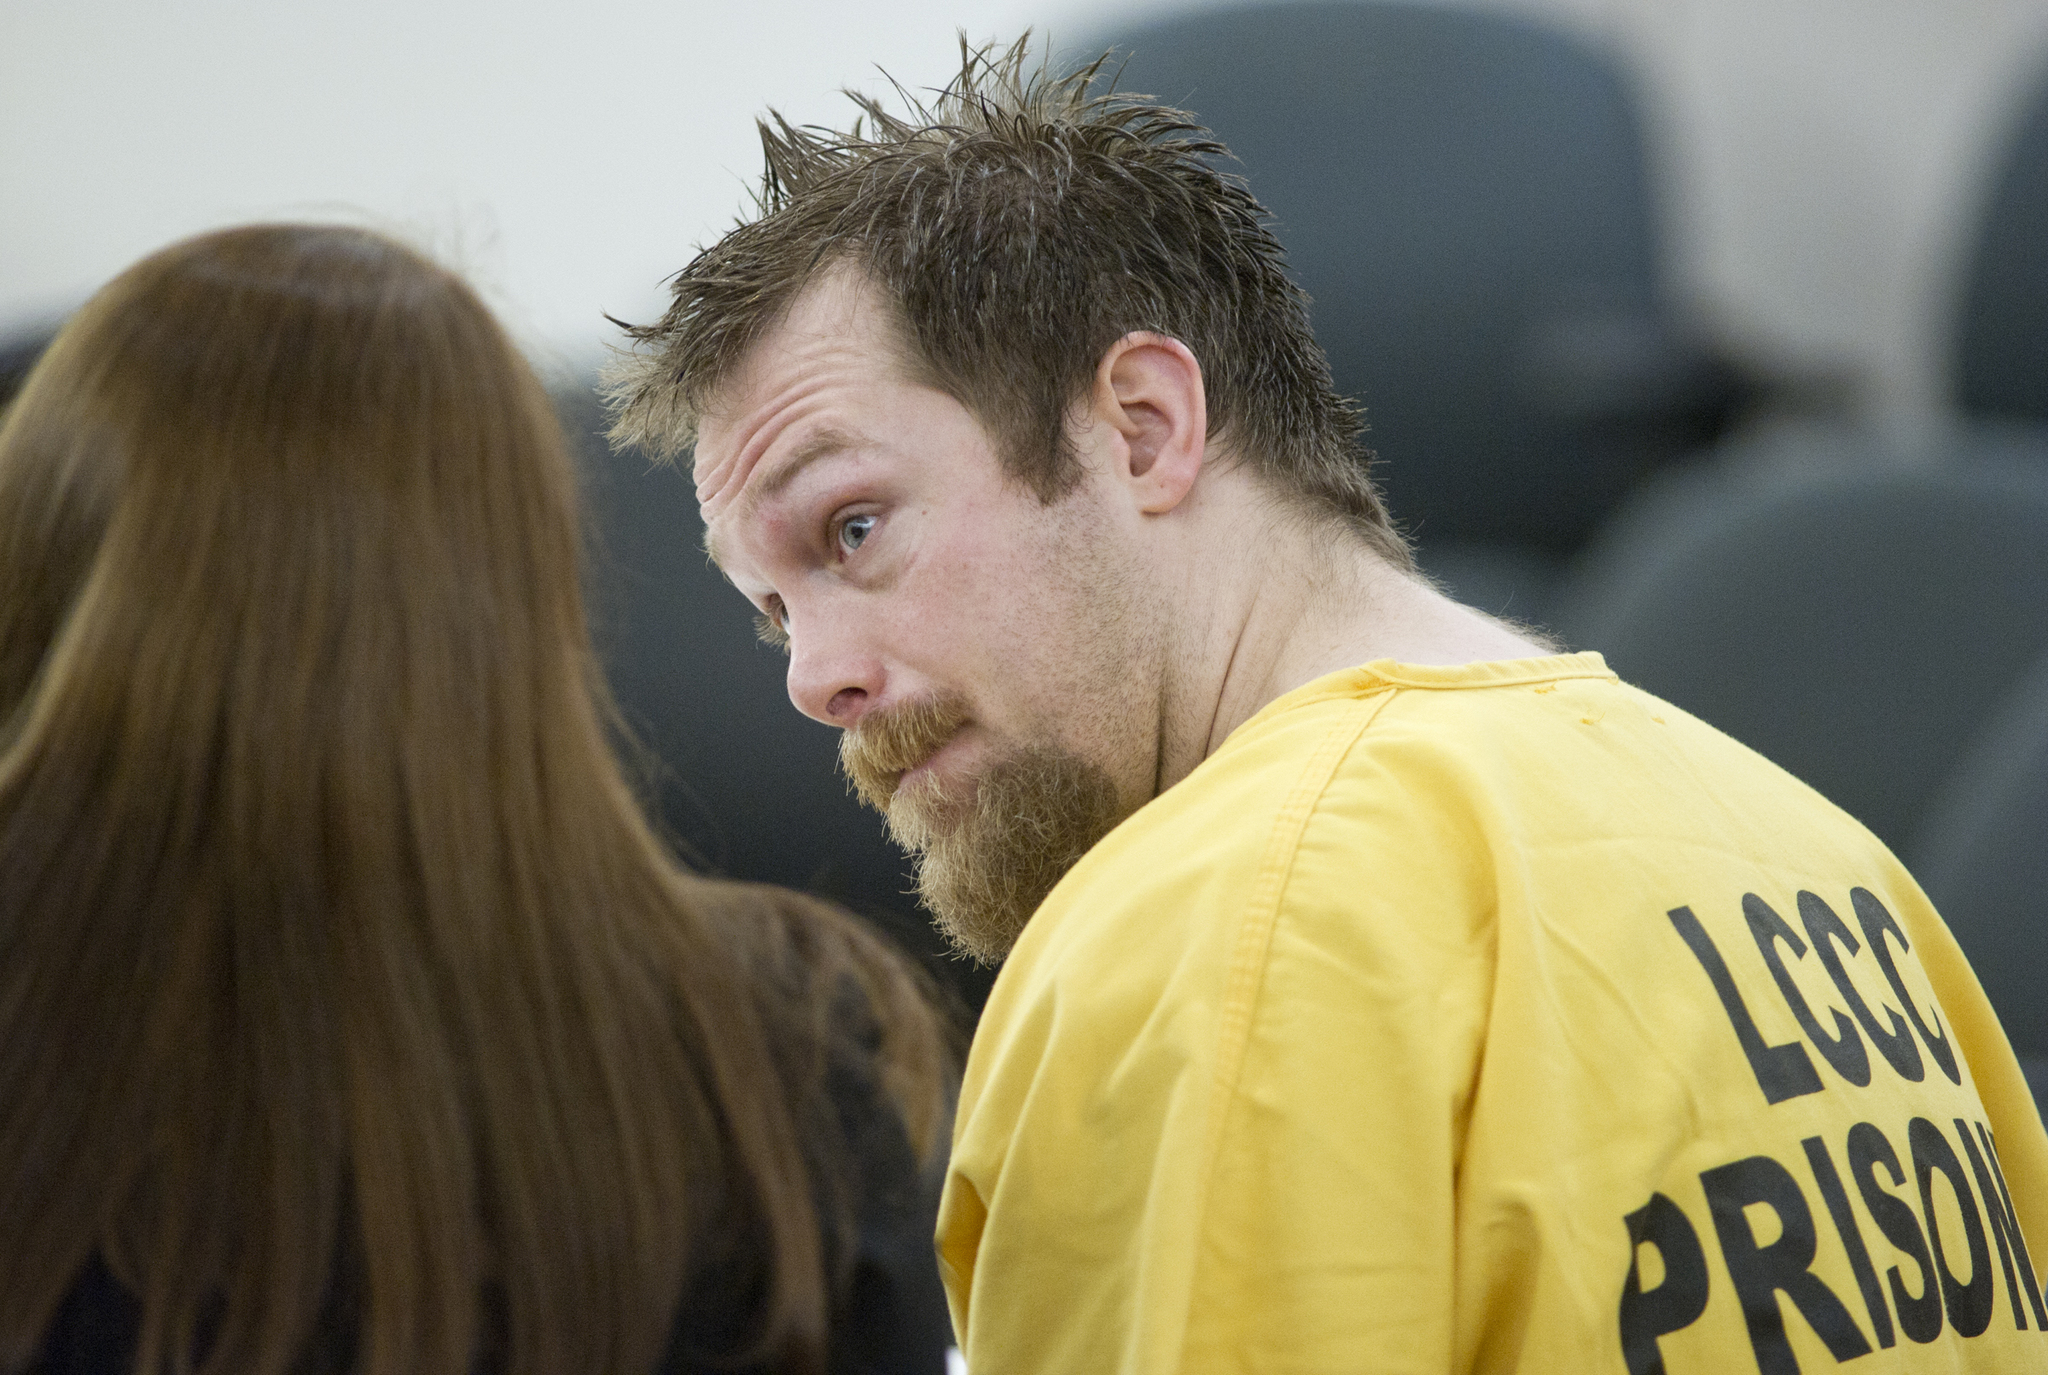 Christopher D. Strawn, 33, appears in Juneau Superior Court on Sept. 12, 2016 for a status hearing on charges in the murder of 30-year-old Brandon C. Cook at the Kodzoff Acres Mobile Home Park Oct. 20, 2015. (Michael Penn | Juneau Empire)